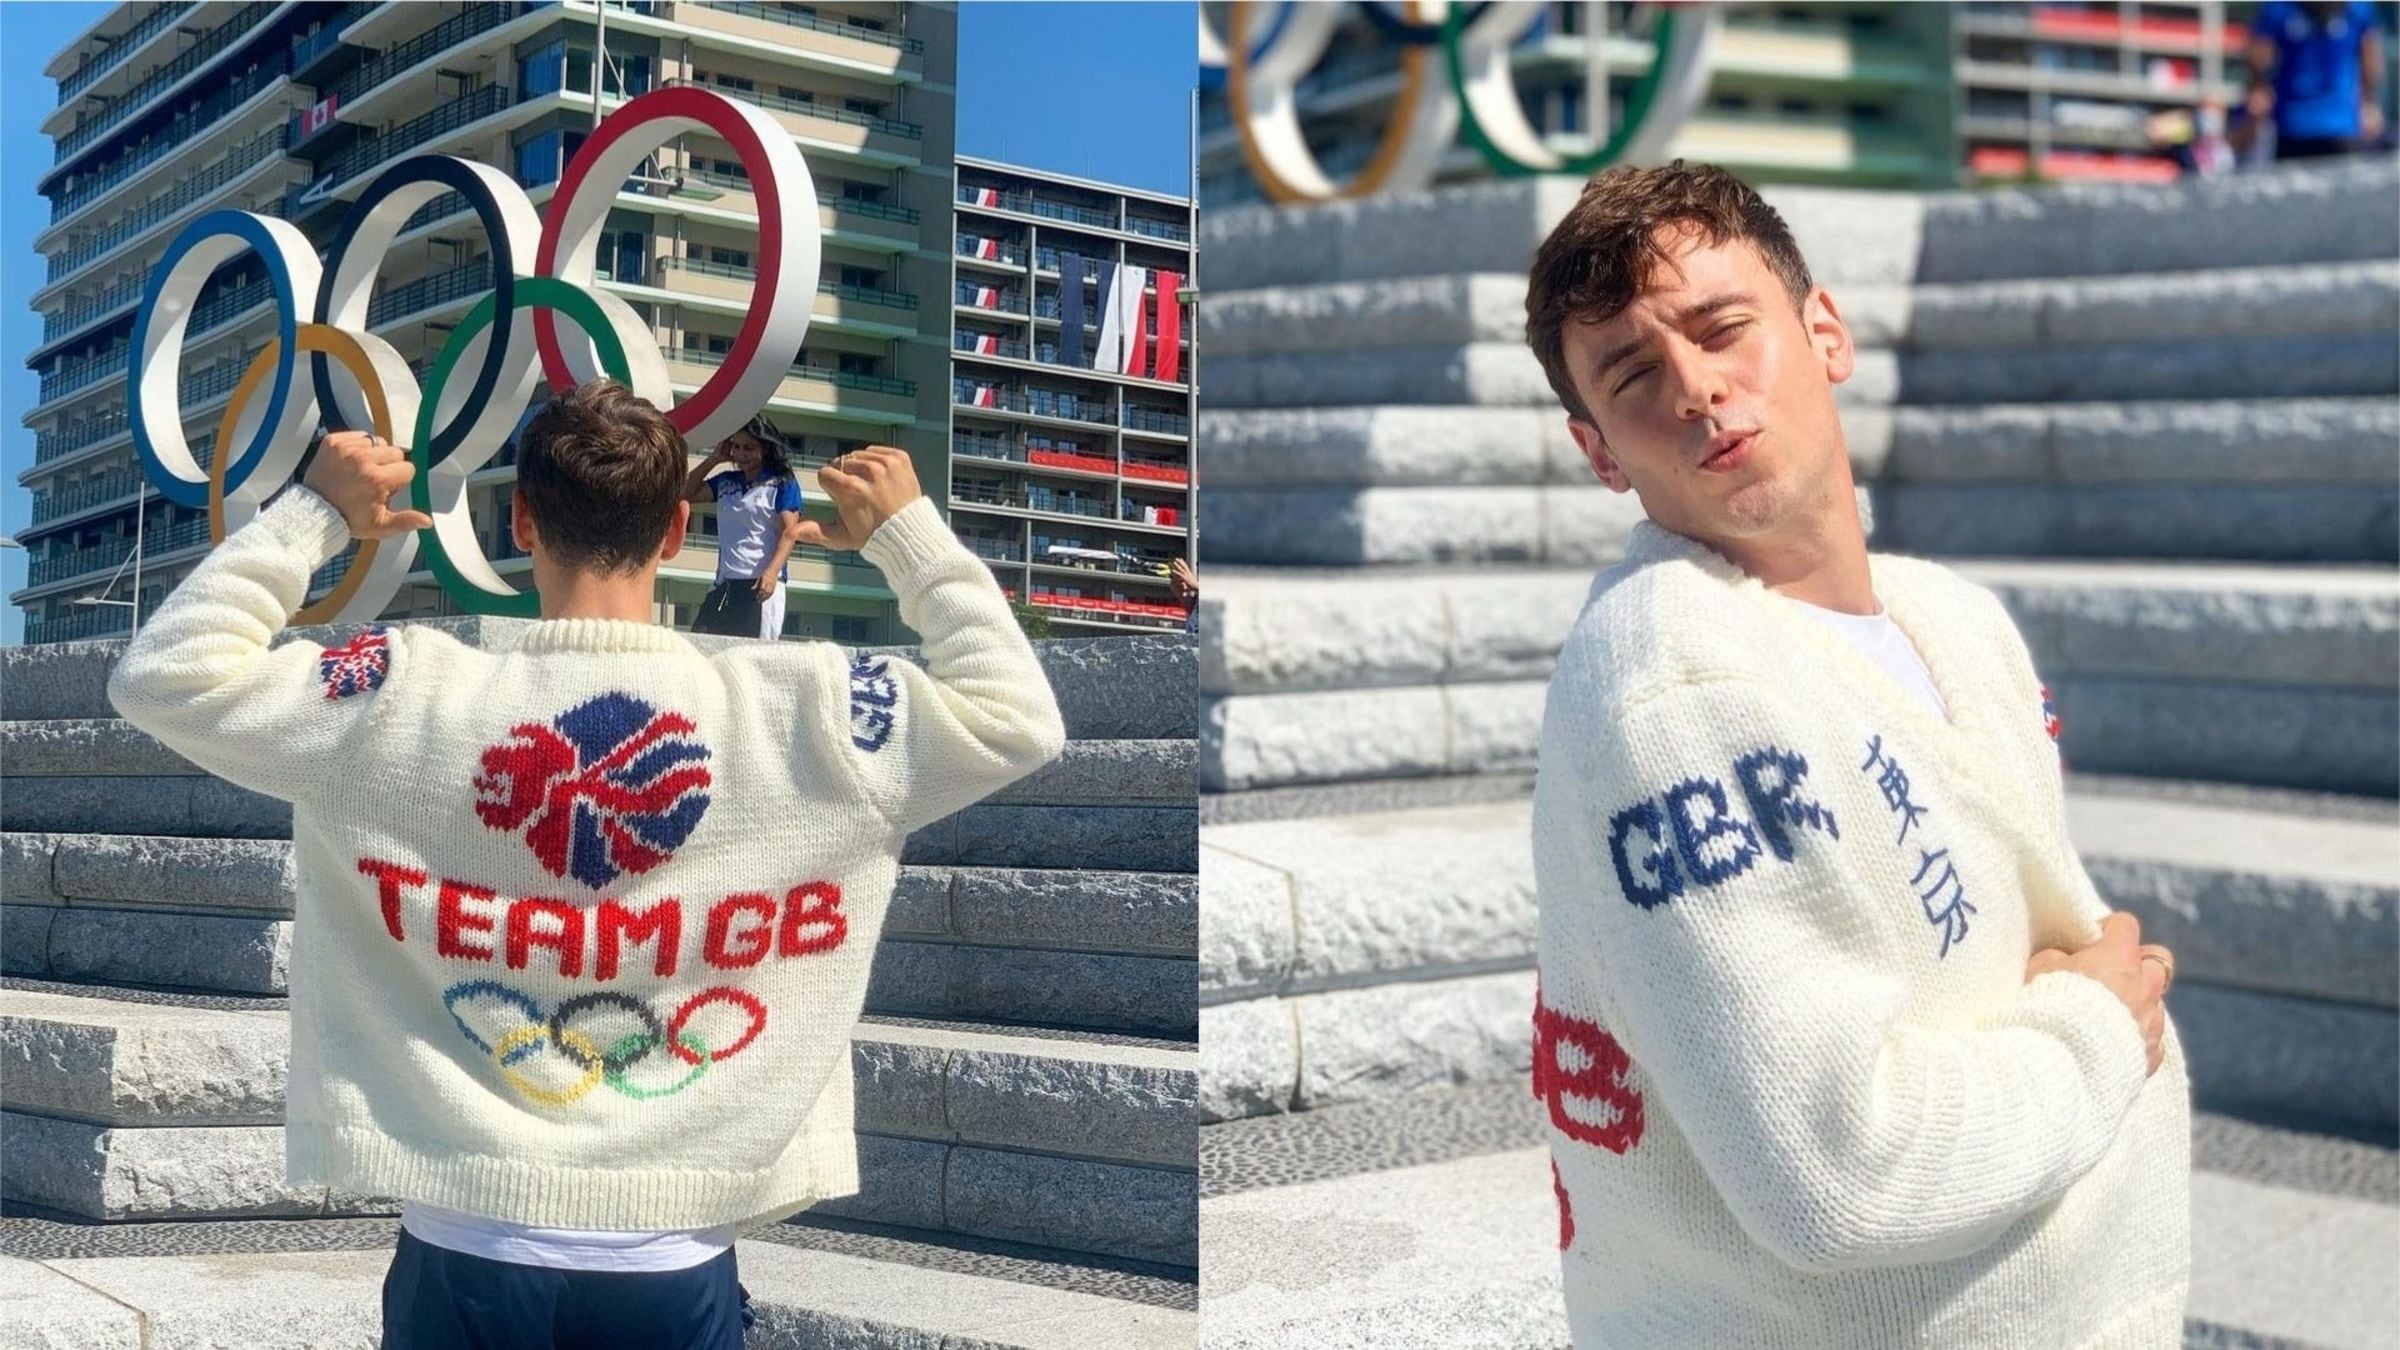 The diver has backed up his Olympic gold with a white woollen number complete with Union flags, Japanese writing and the Olympic emblem.